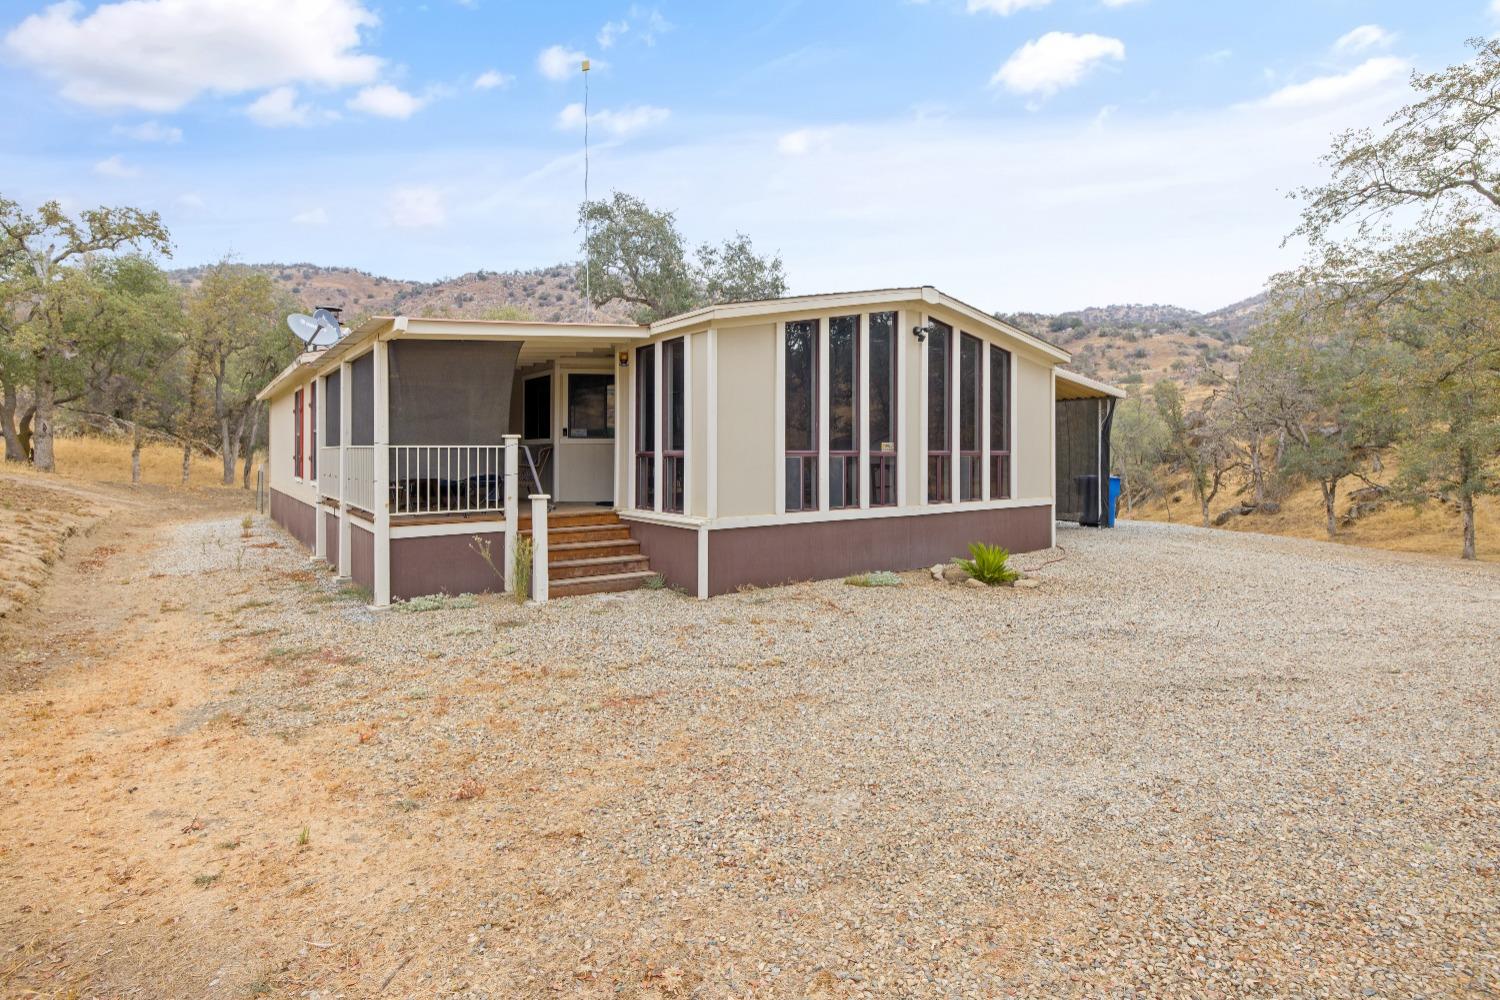 Photo of 38772 Deerbrook Ln in Squaw Valley, CA